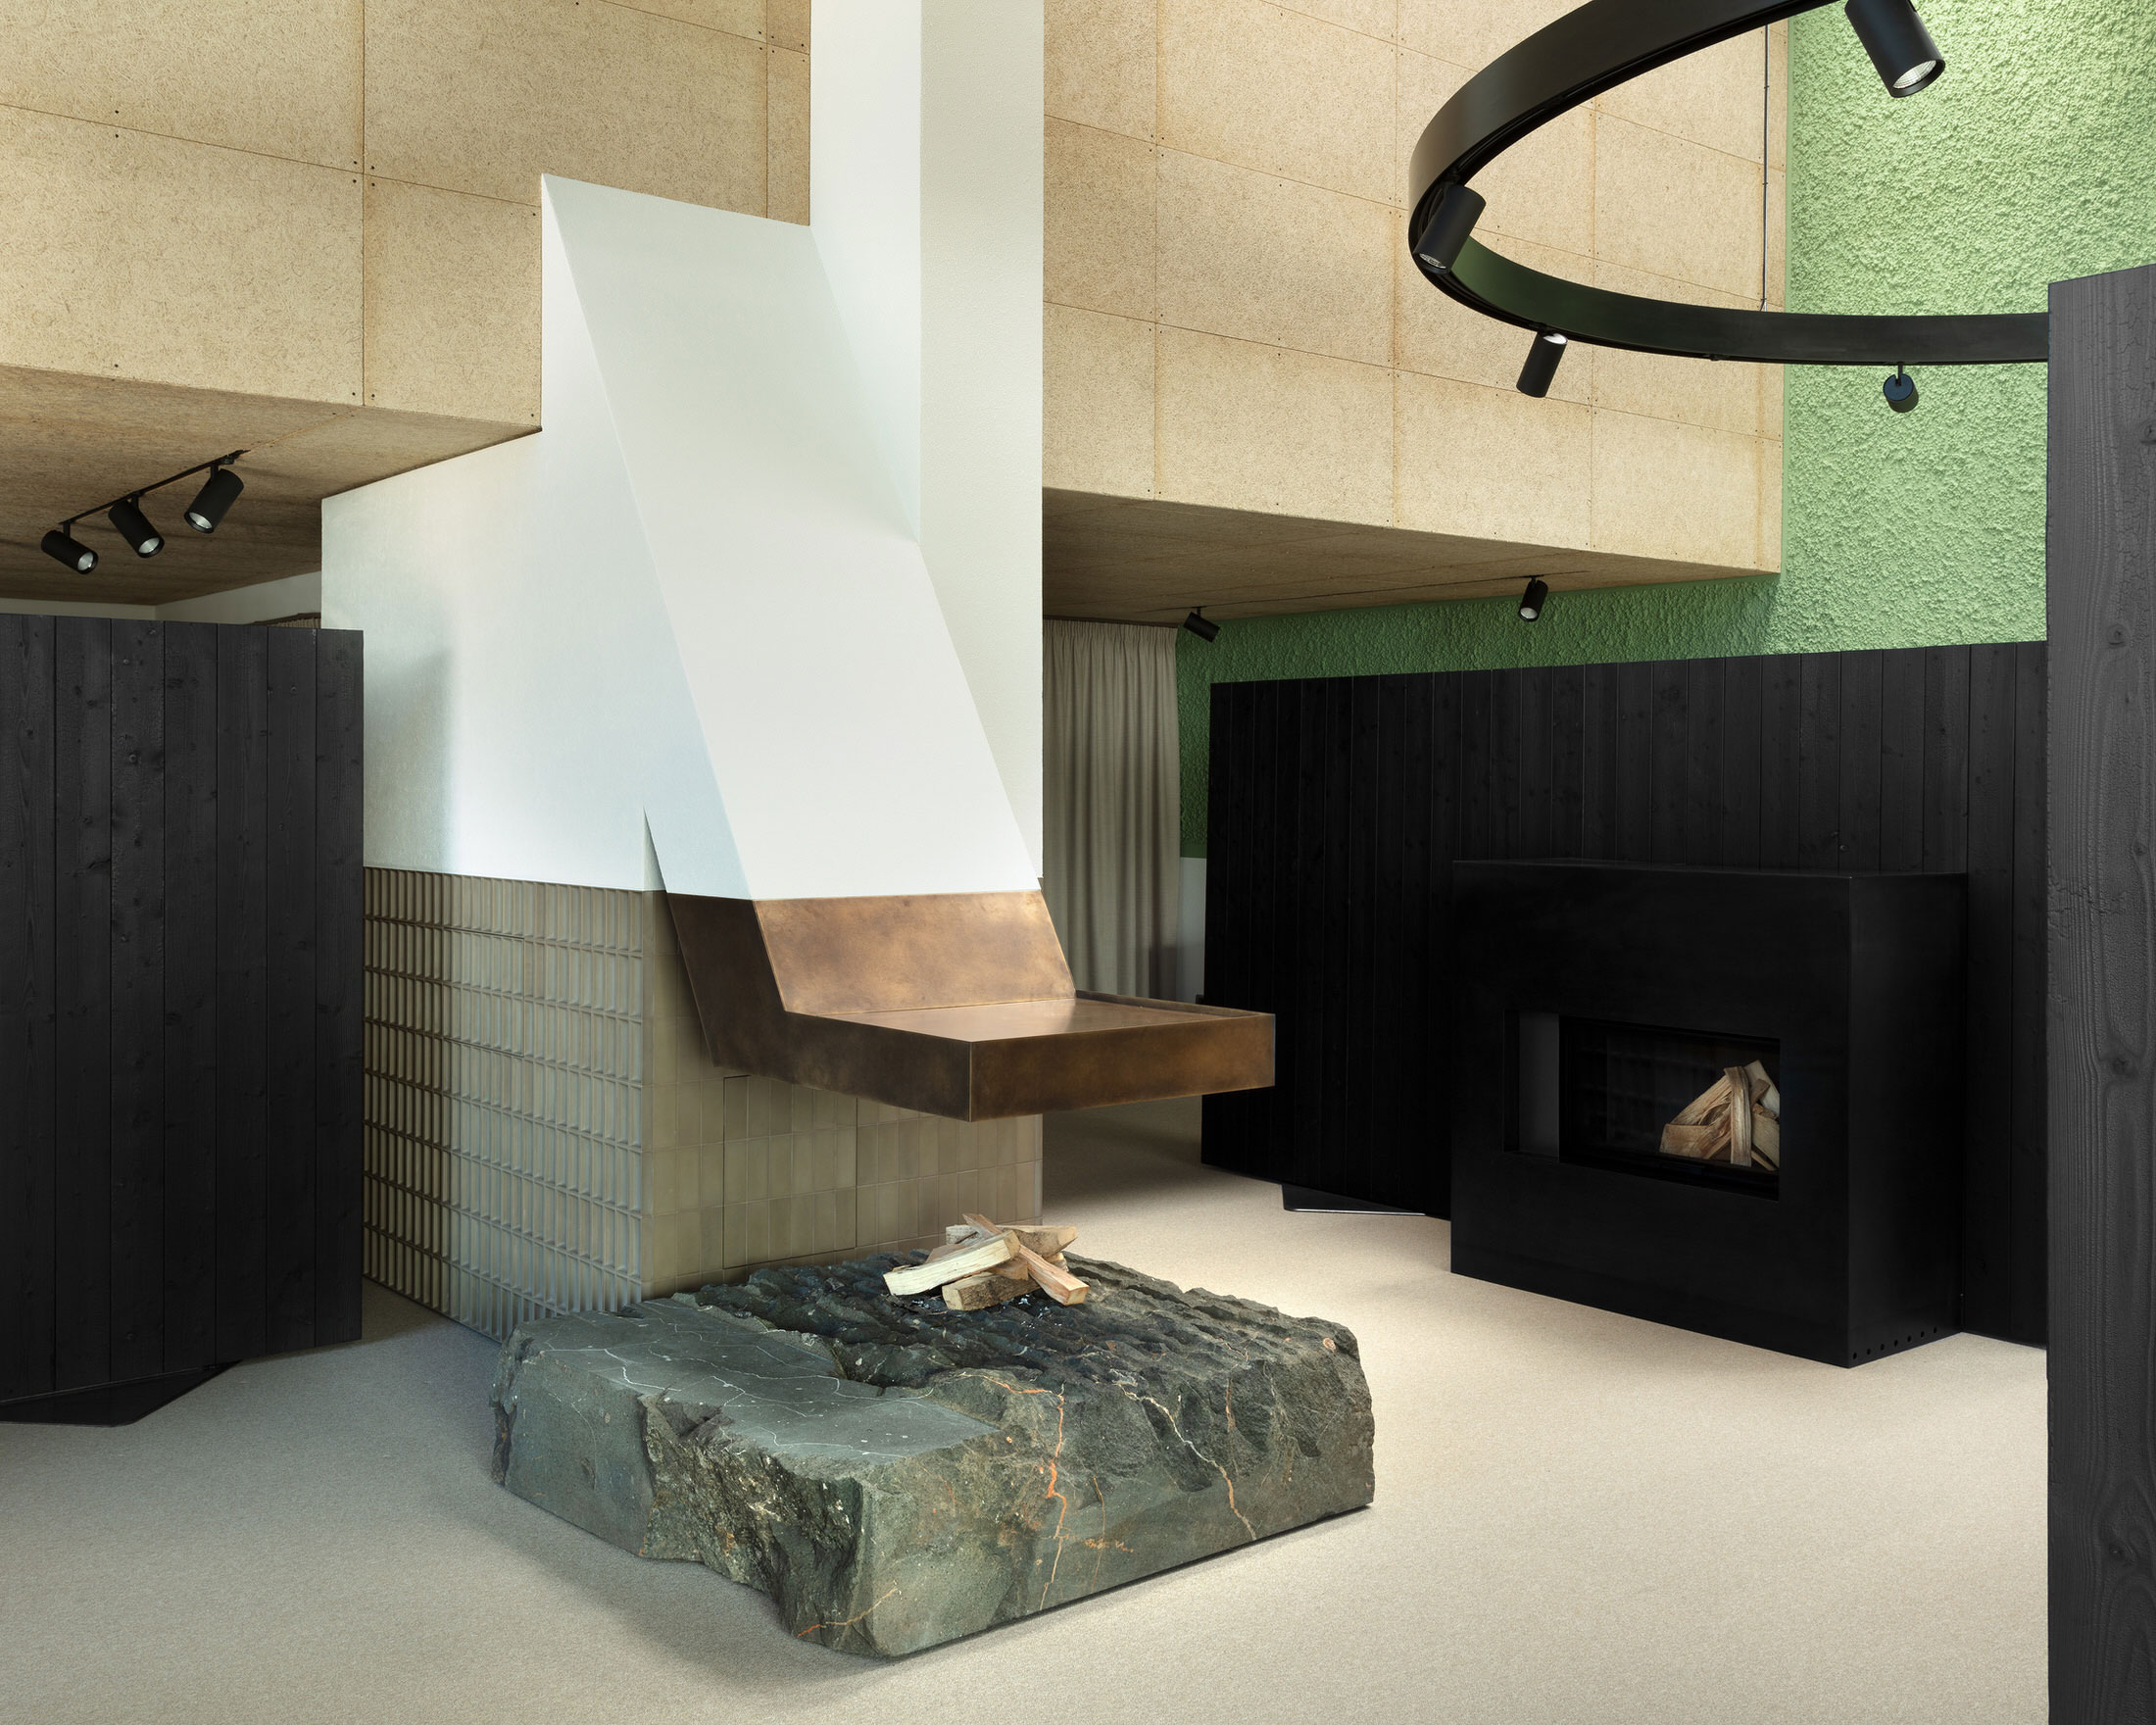 Messner Architects Pohl Fireplace Showroom Italy Photo Karina Castro Yellowtrace 12